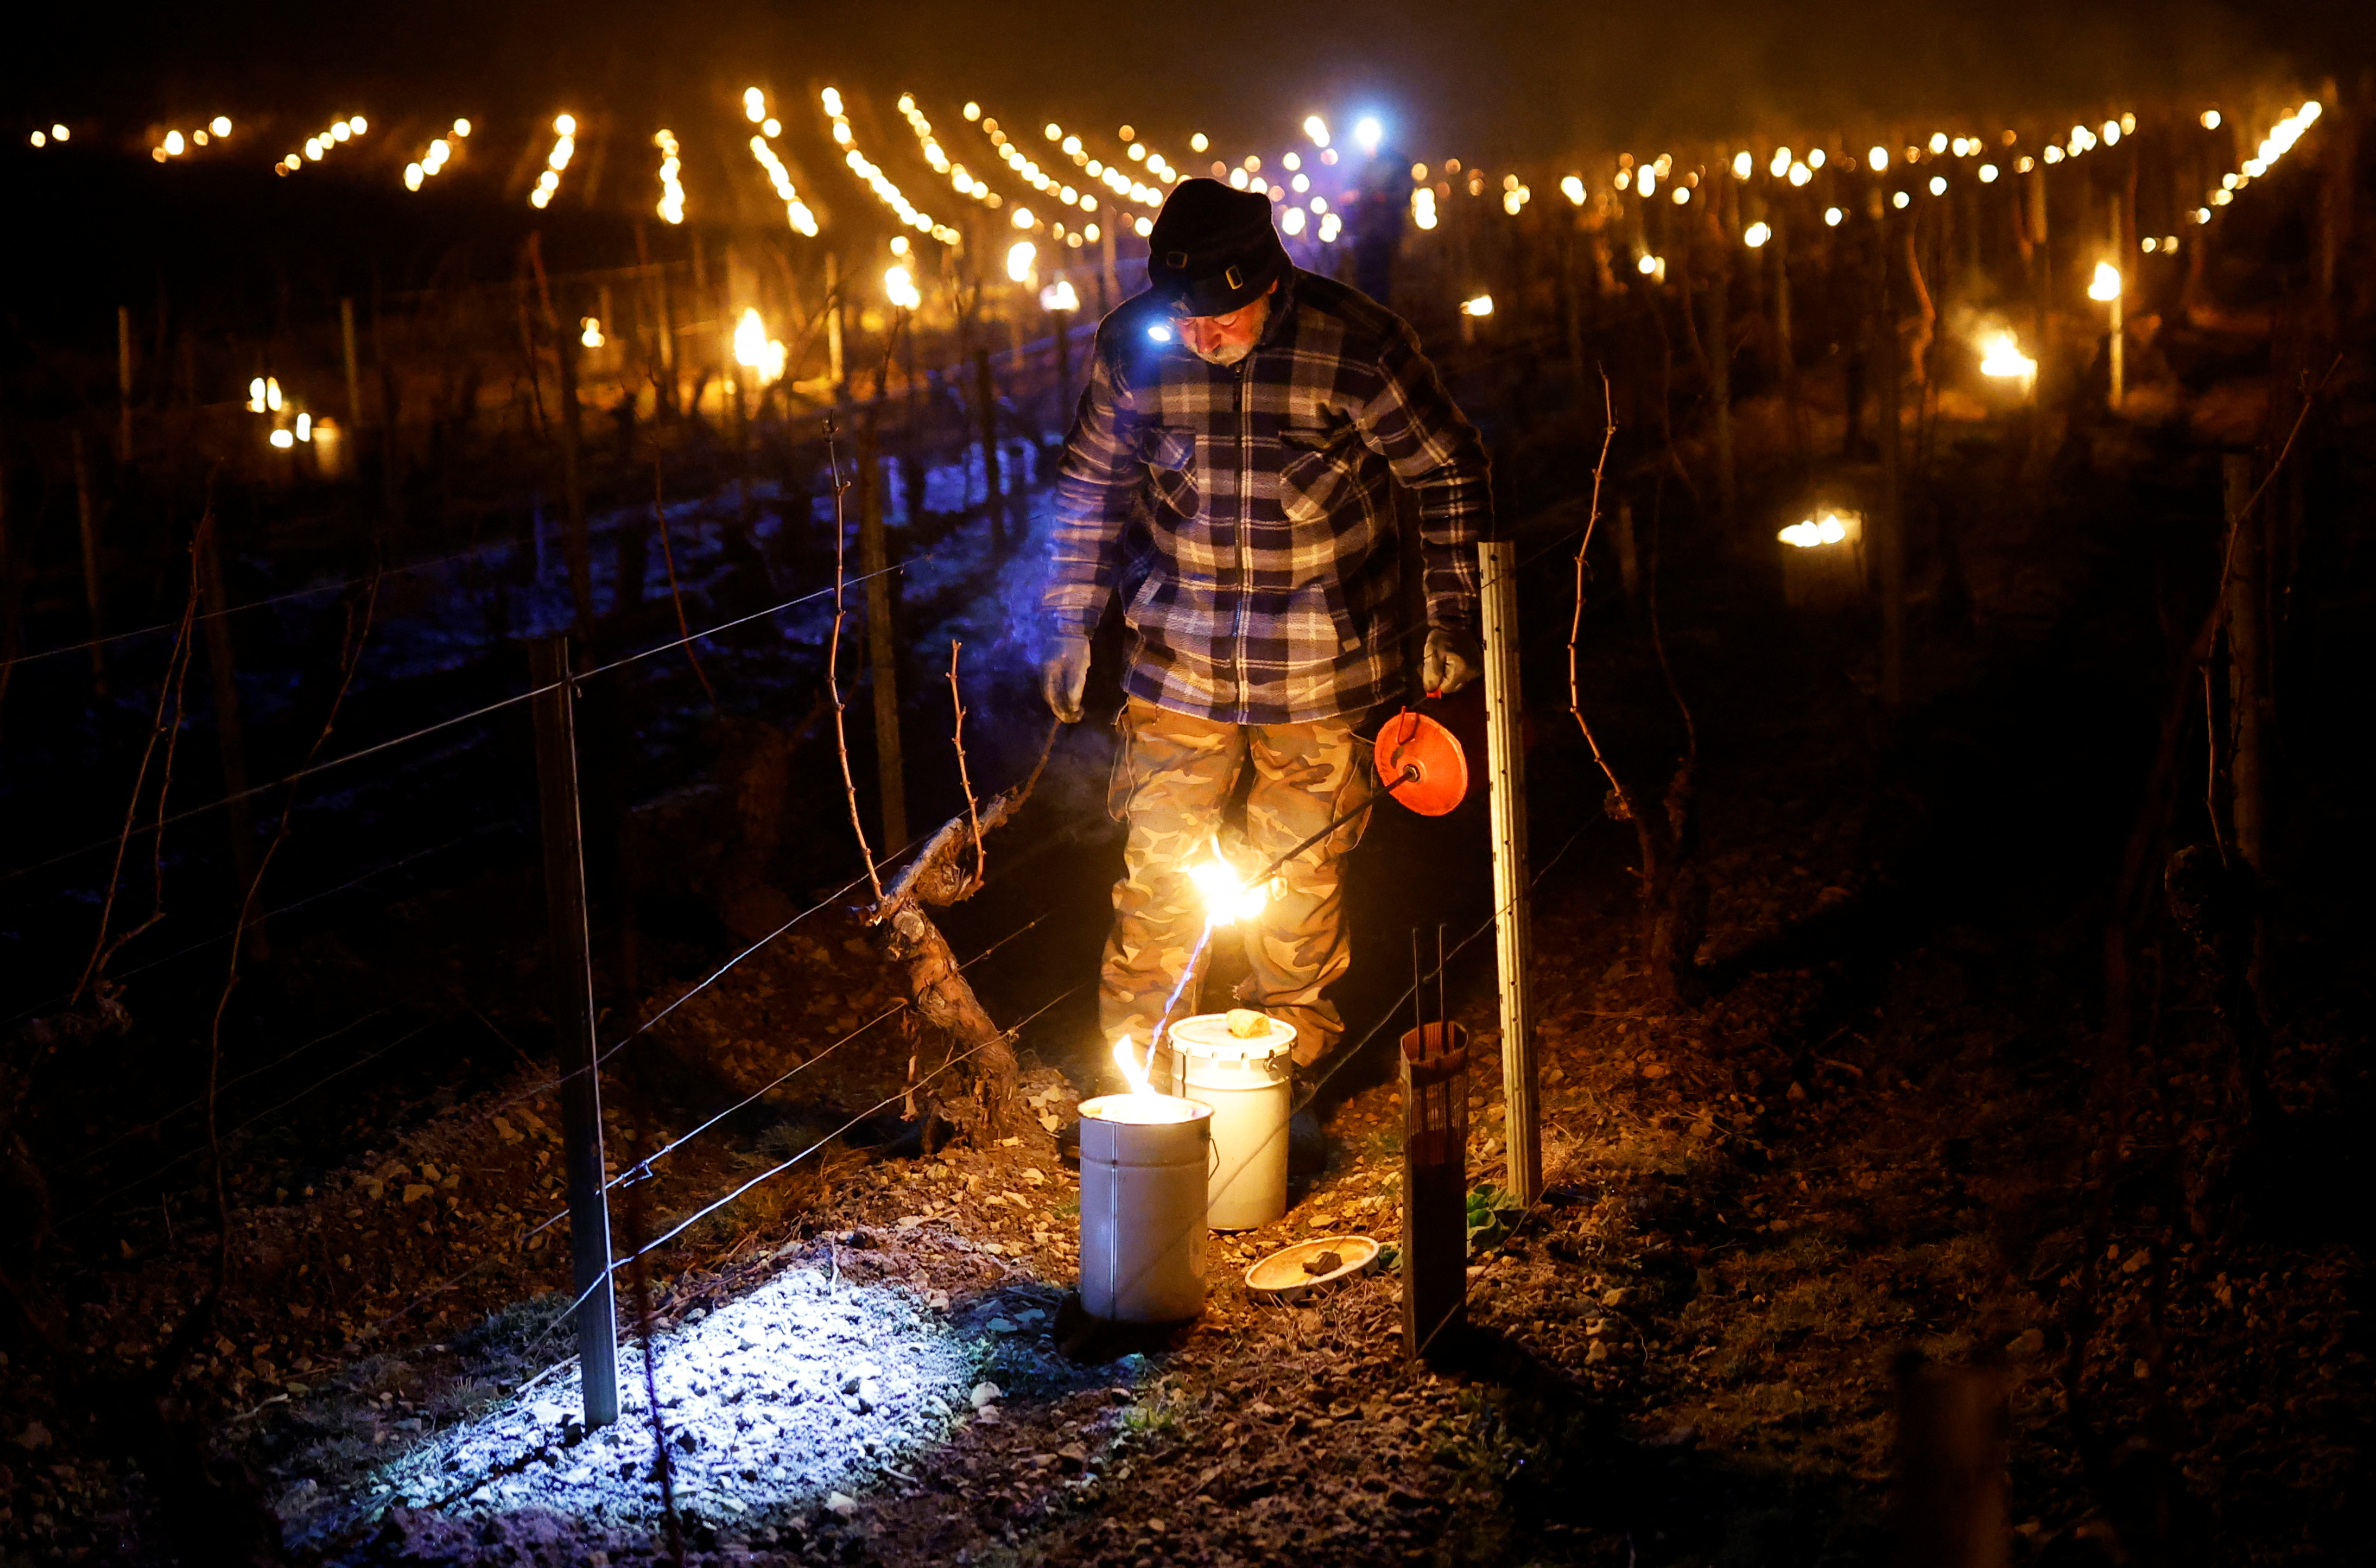 Vineyard owners fight frost in France